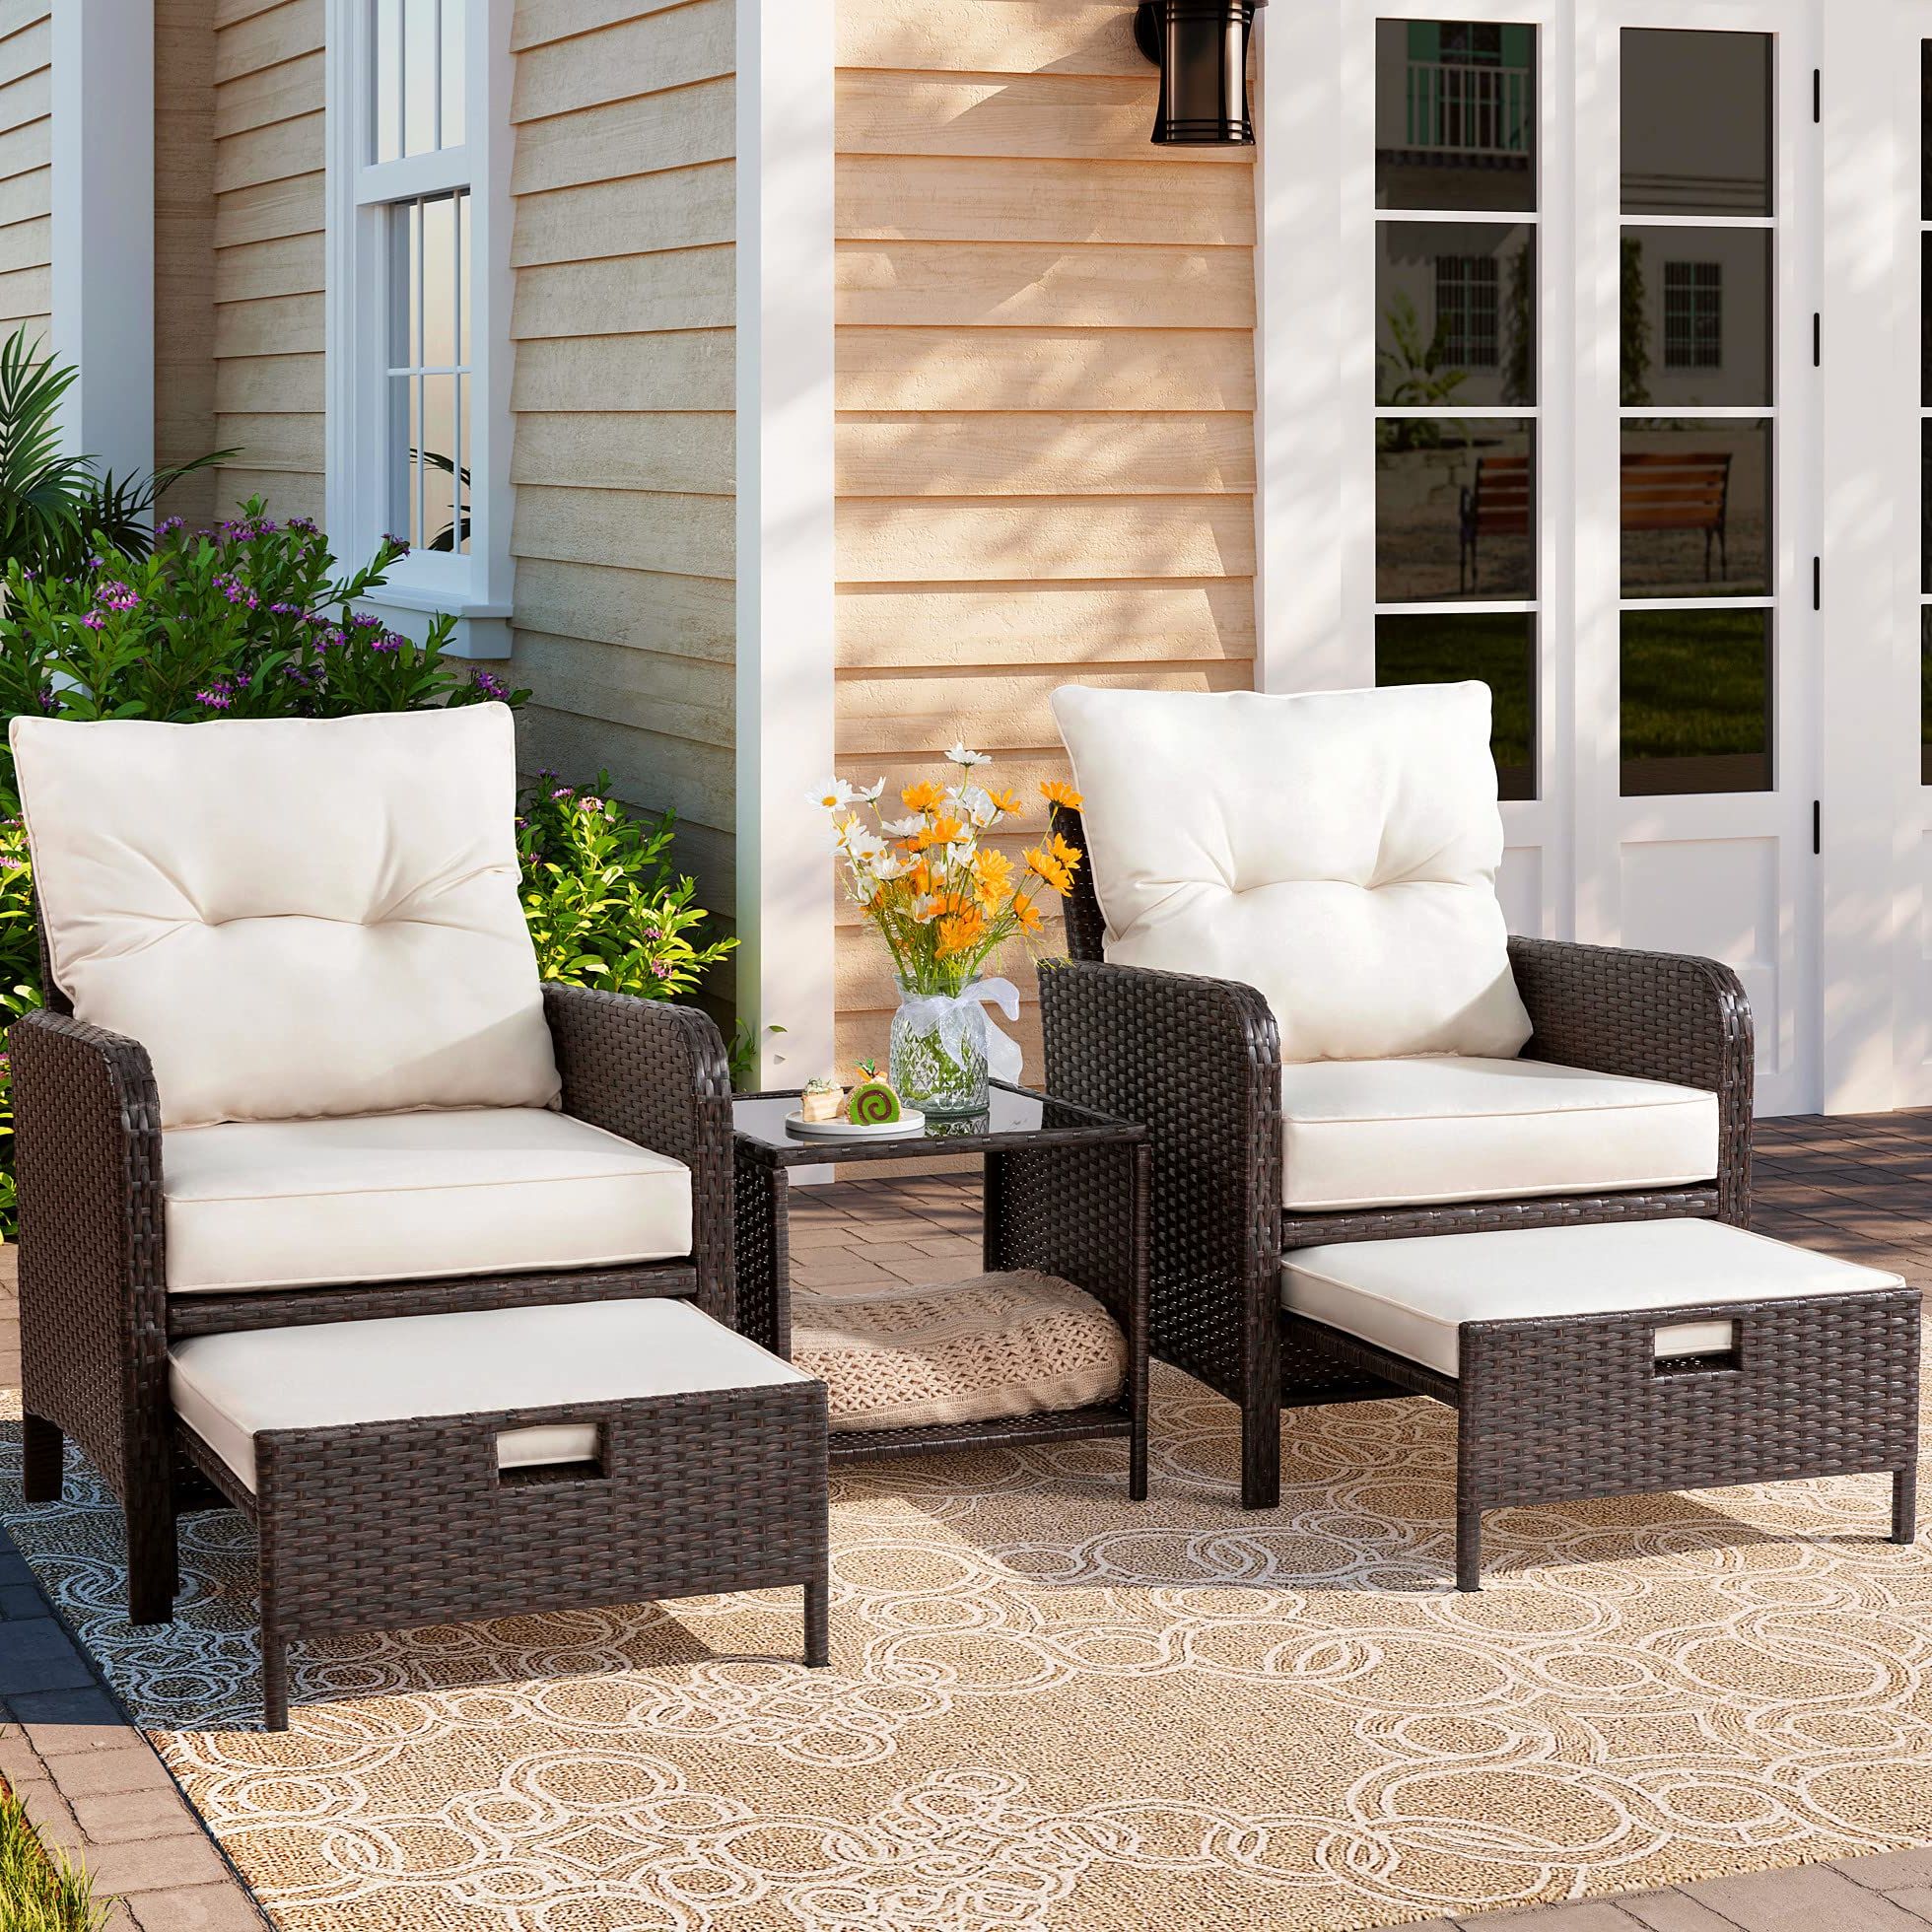 5 Piece Patio Furniture Set Regarding Newest Amazon: Vongrasig 5 Piece Wicker Patio Furniture Set, All Weather Pe  Wicker Rattan Outdoor Chair And Ottoman Set, Small Cushioned Patio Chairs  With Ottoman Underneath For Lawn Garden Backyard (beige) : Patio, (Photo 5 of 15)